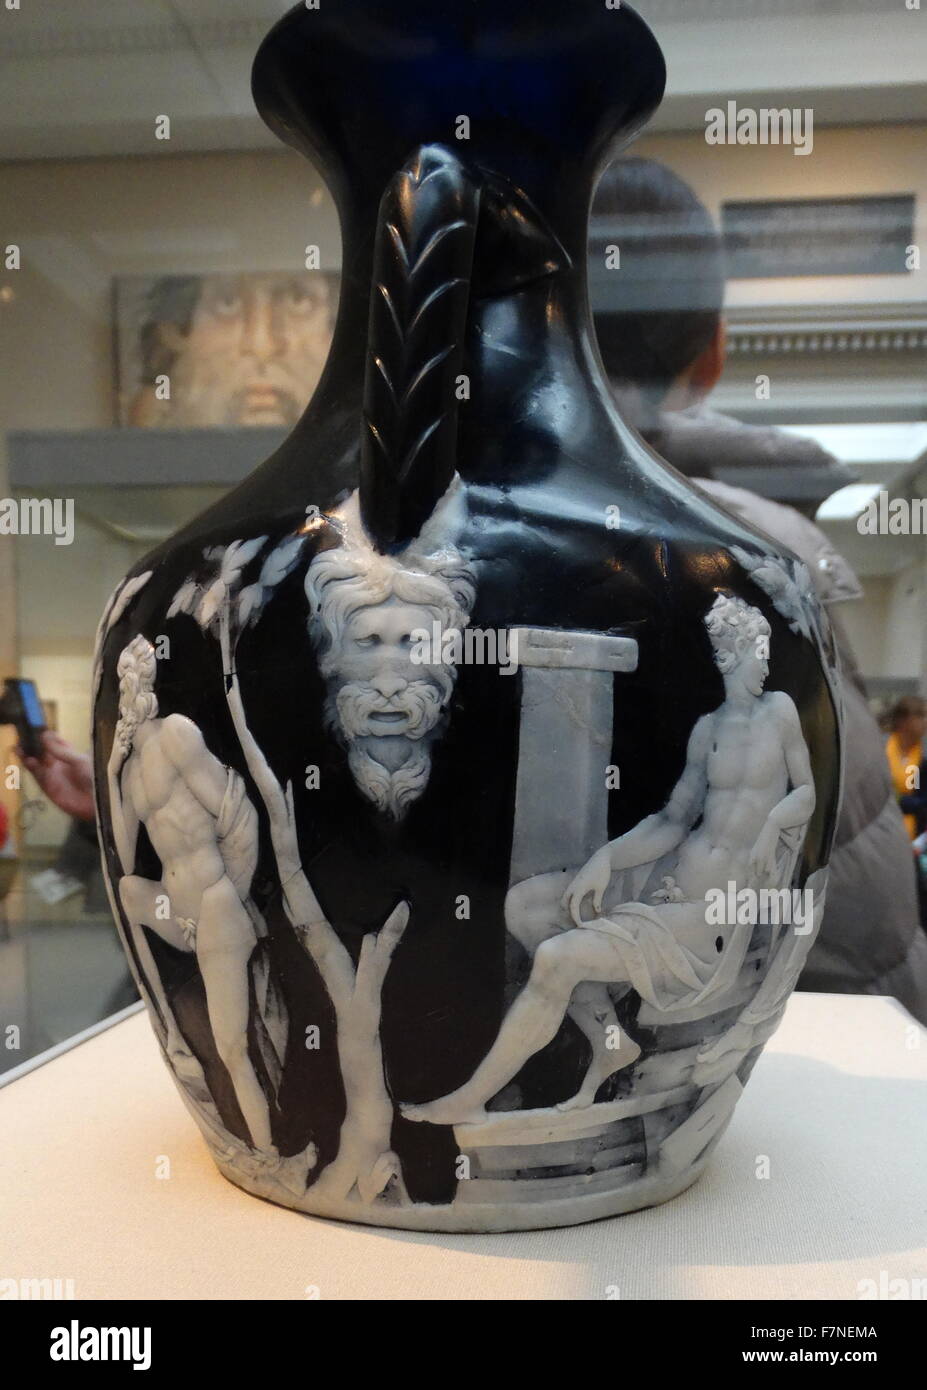 The Portland Vase. Cameo glass, probably made in Rome about 15 BC - AD 25. The Portland Vase is one of the finest surviving pieces of Roman glass, and is named after the Dukes of Portland who owned it from 1785 to 1945. Stock Photo